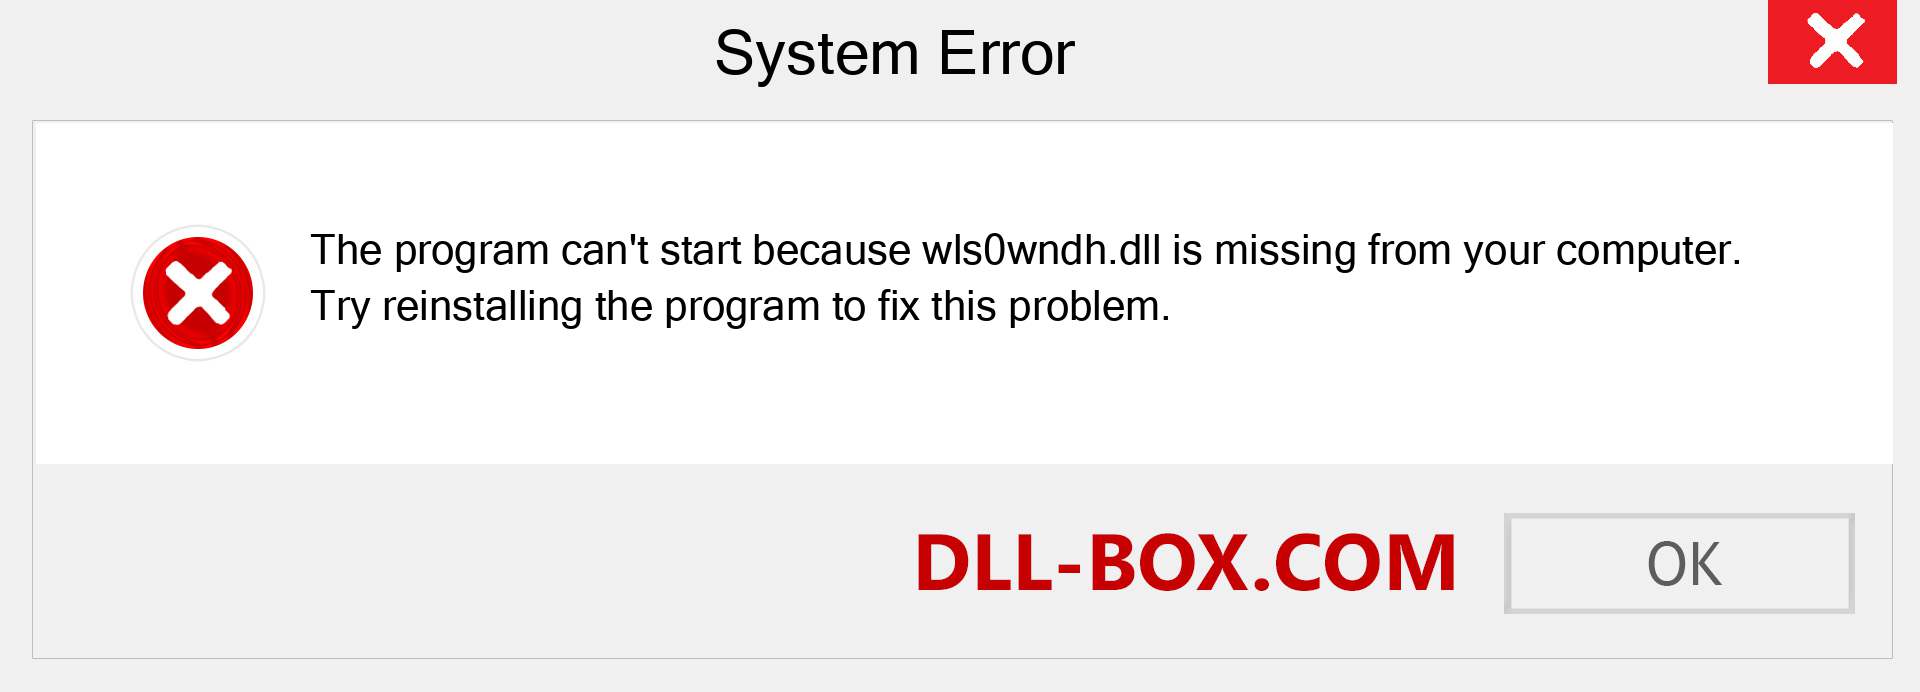  wls0wndh.dll file is missing?. Download for Windows 7, 8, 10 - Fix  wls0wndh dll Missing Error on Windows, photos, images